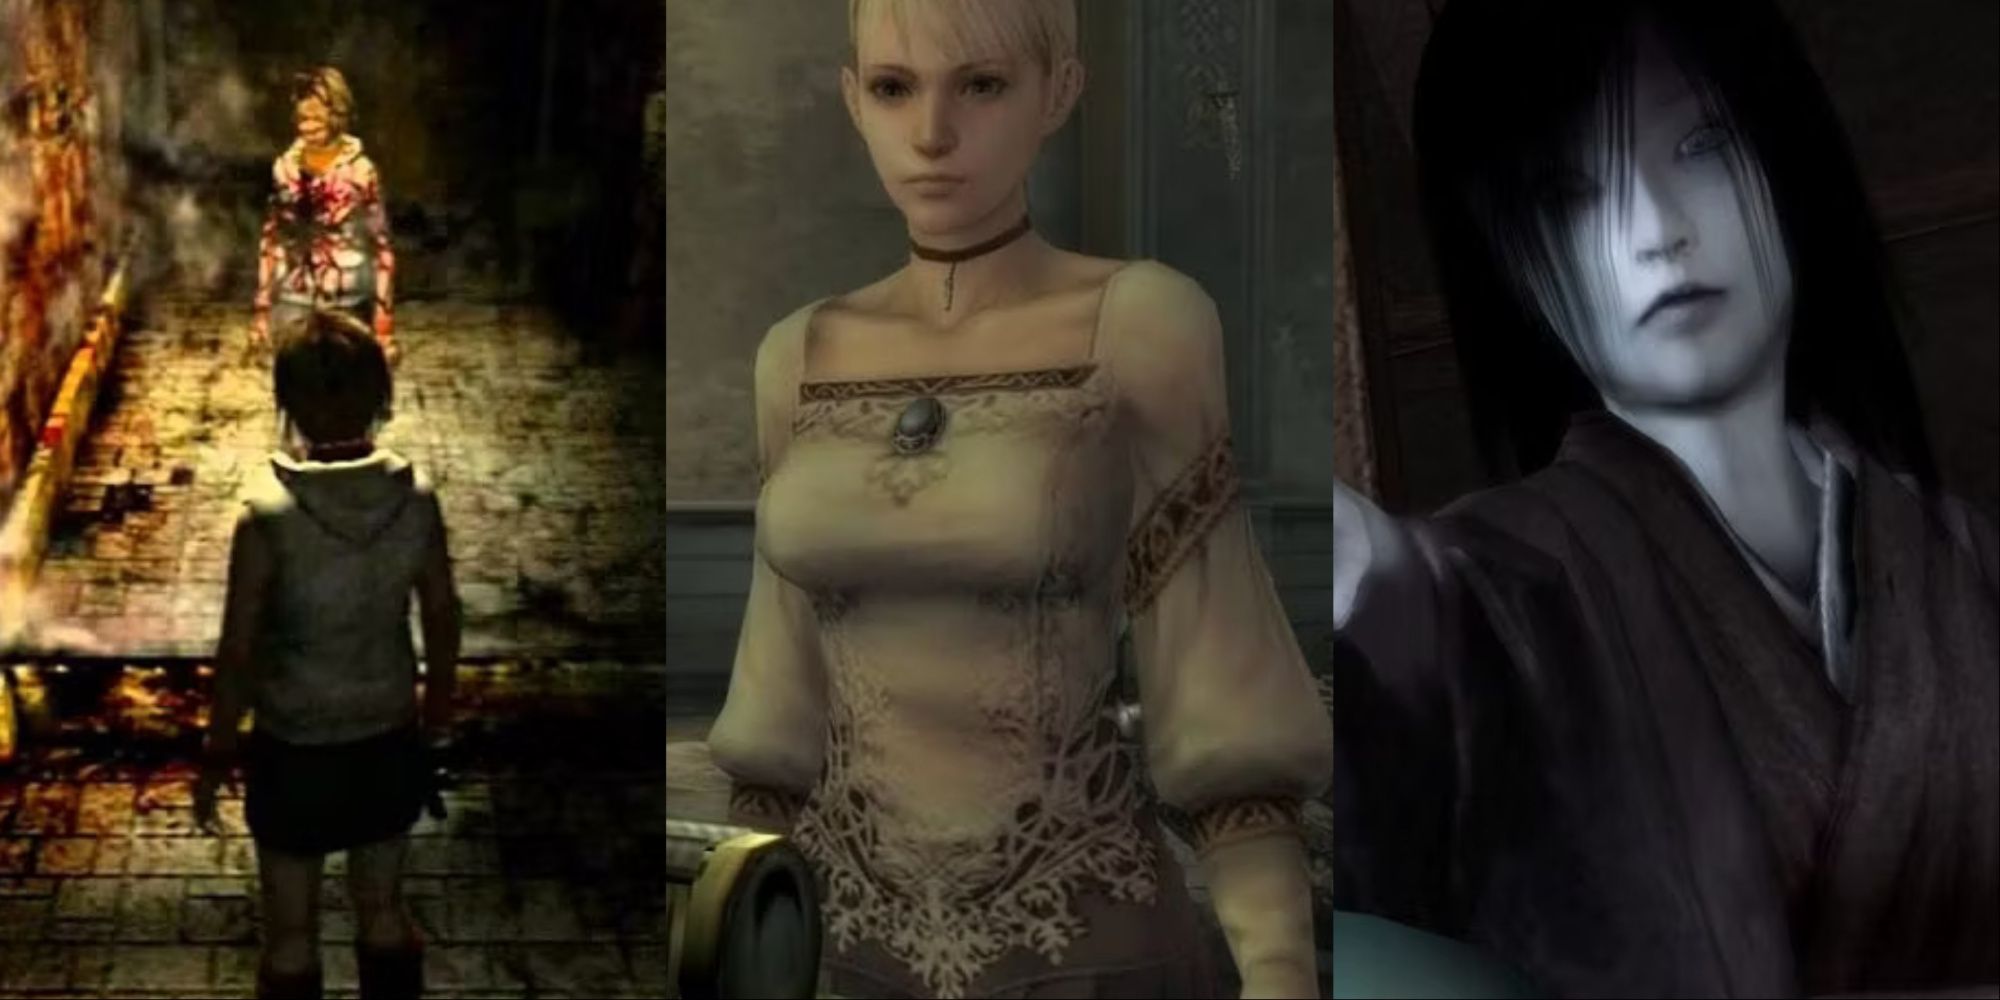 A collage showing characters from Silent Hill 3, Hunting Grounds, and Fatal Frame 3.